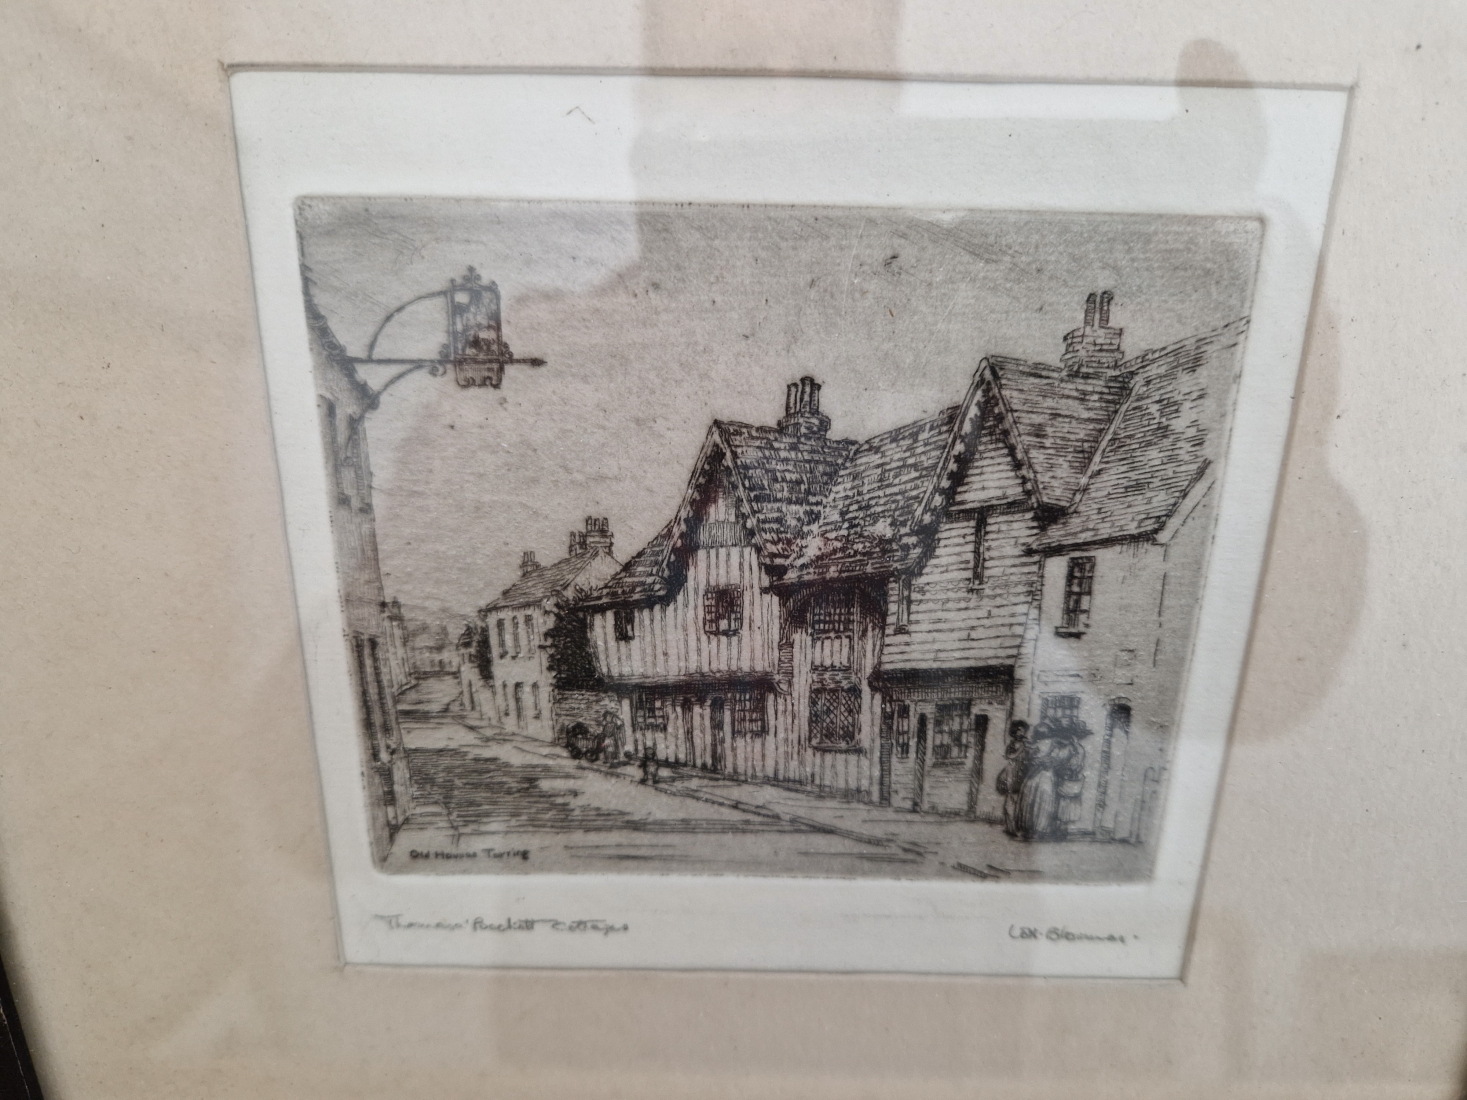 TWO EARLY 20th C. ENGLISH PENCIL SIGNED LANDSCAPE ETCHINGS, BOTH SIGNED INDISTINCTLY. LARGEST 11 x - Image 4 of 6